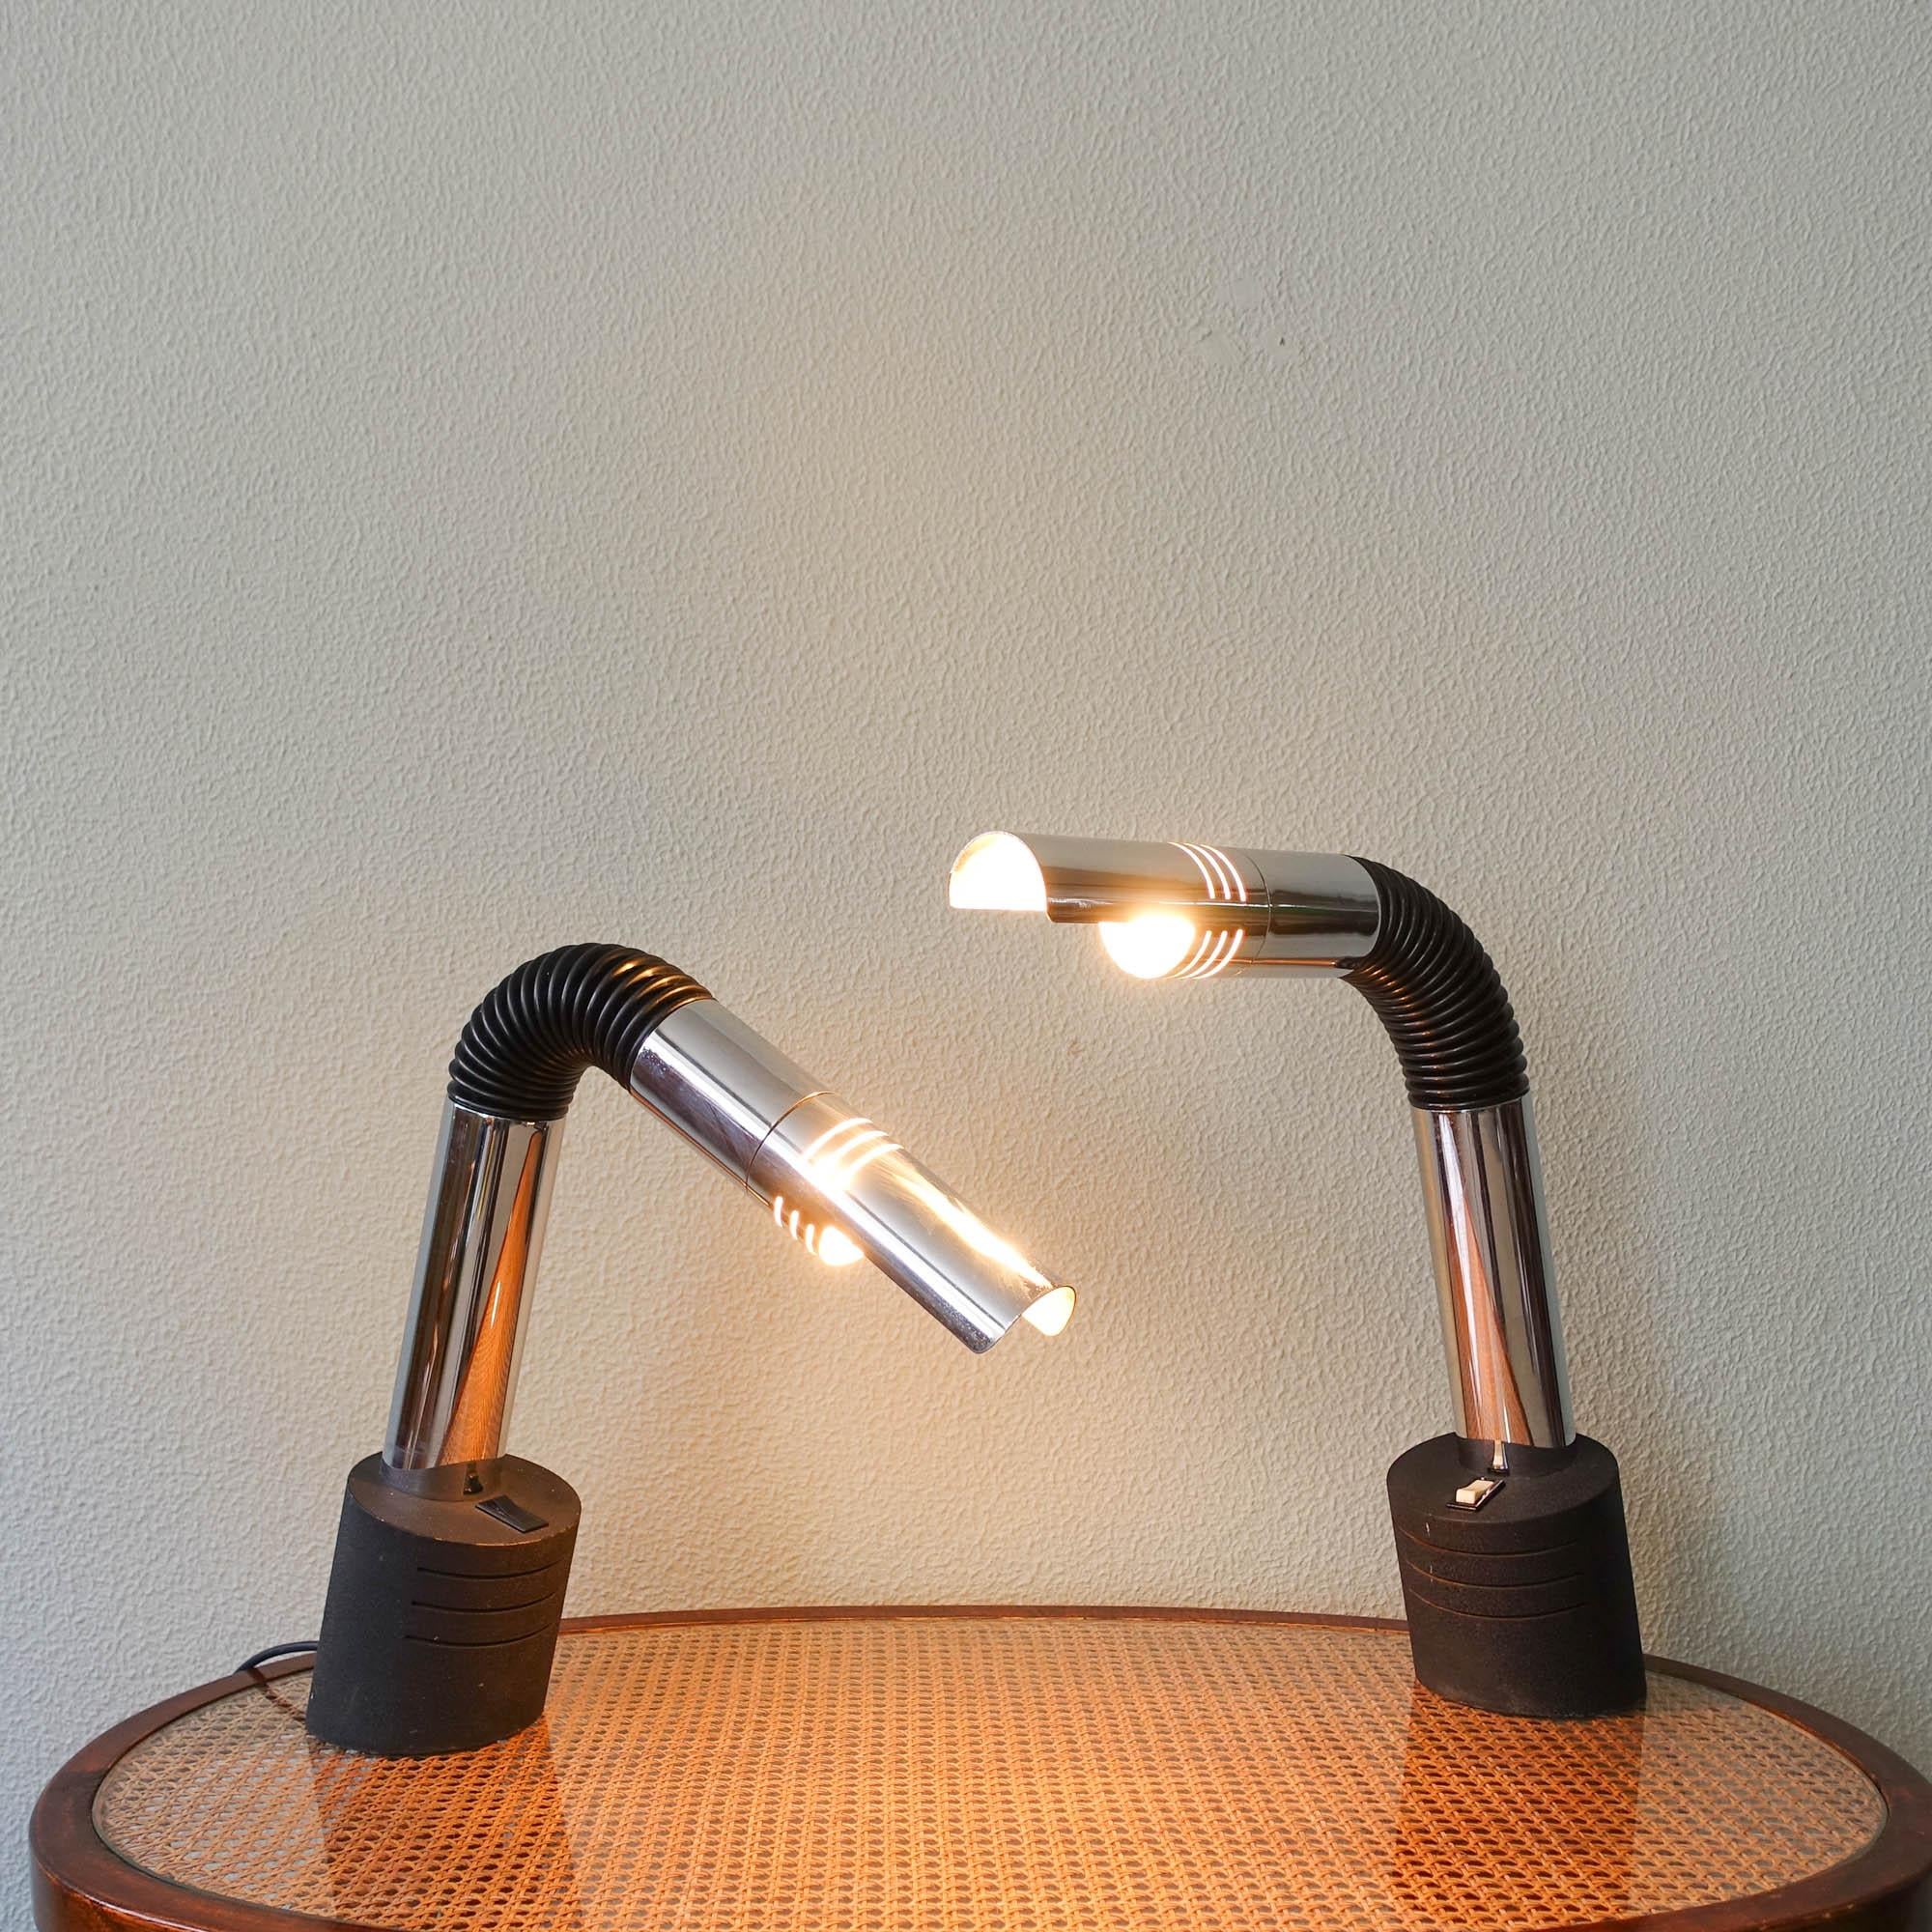 Italian Pair of “Elbow” Table Lamp by E. Bellini for Targetti Sankey, 1970s